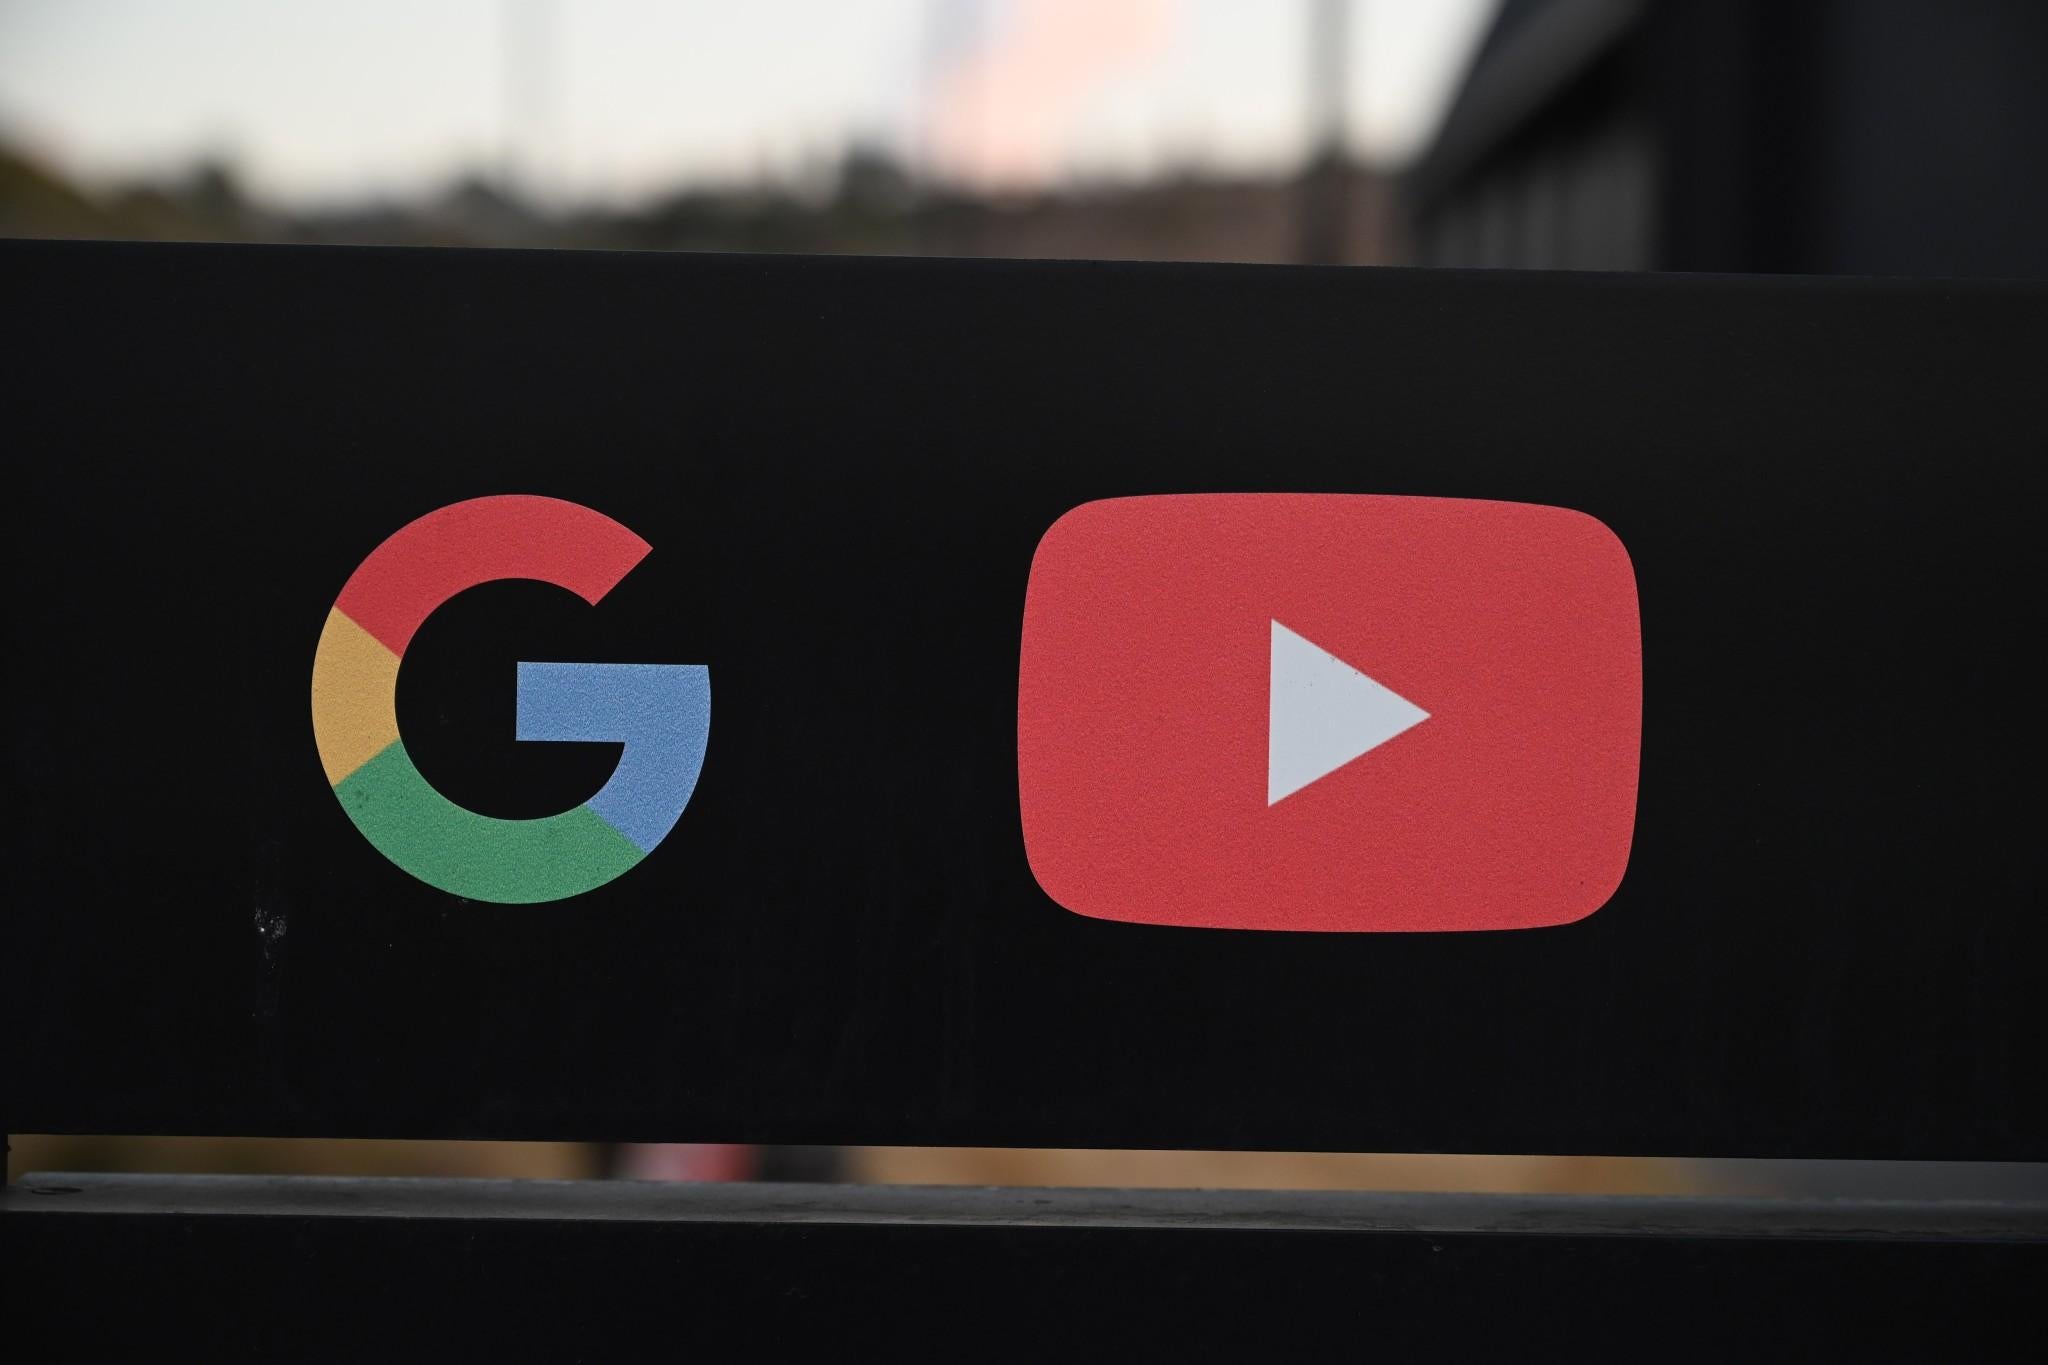 YouTube is part of tech giant Google